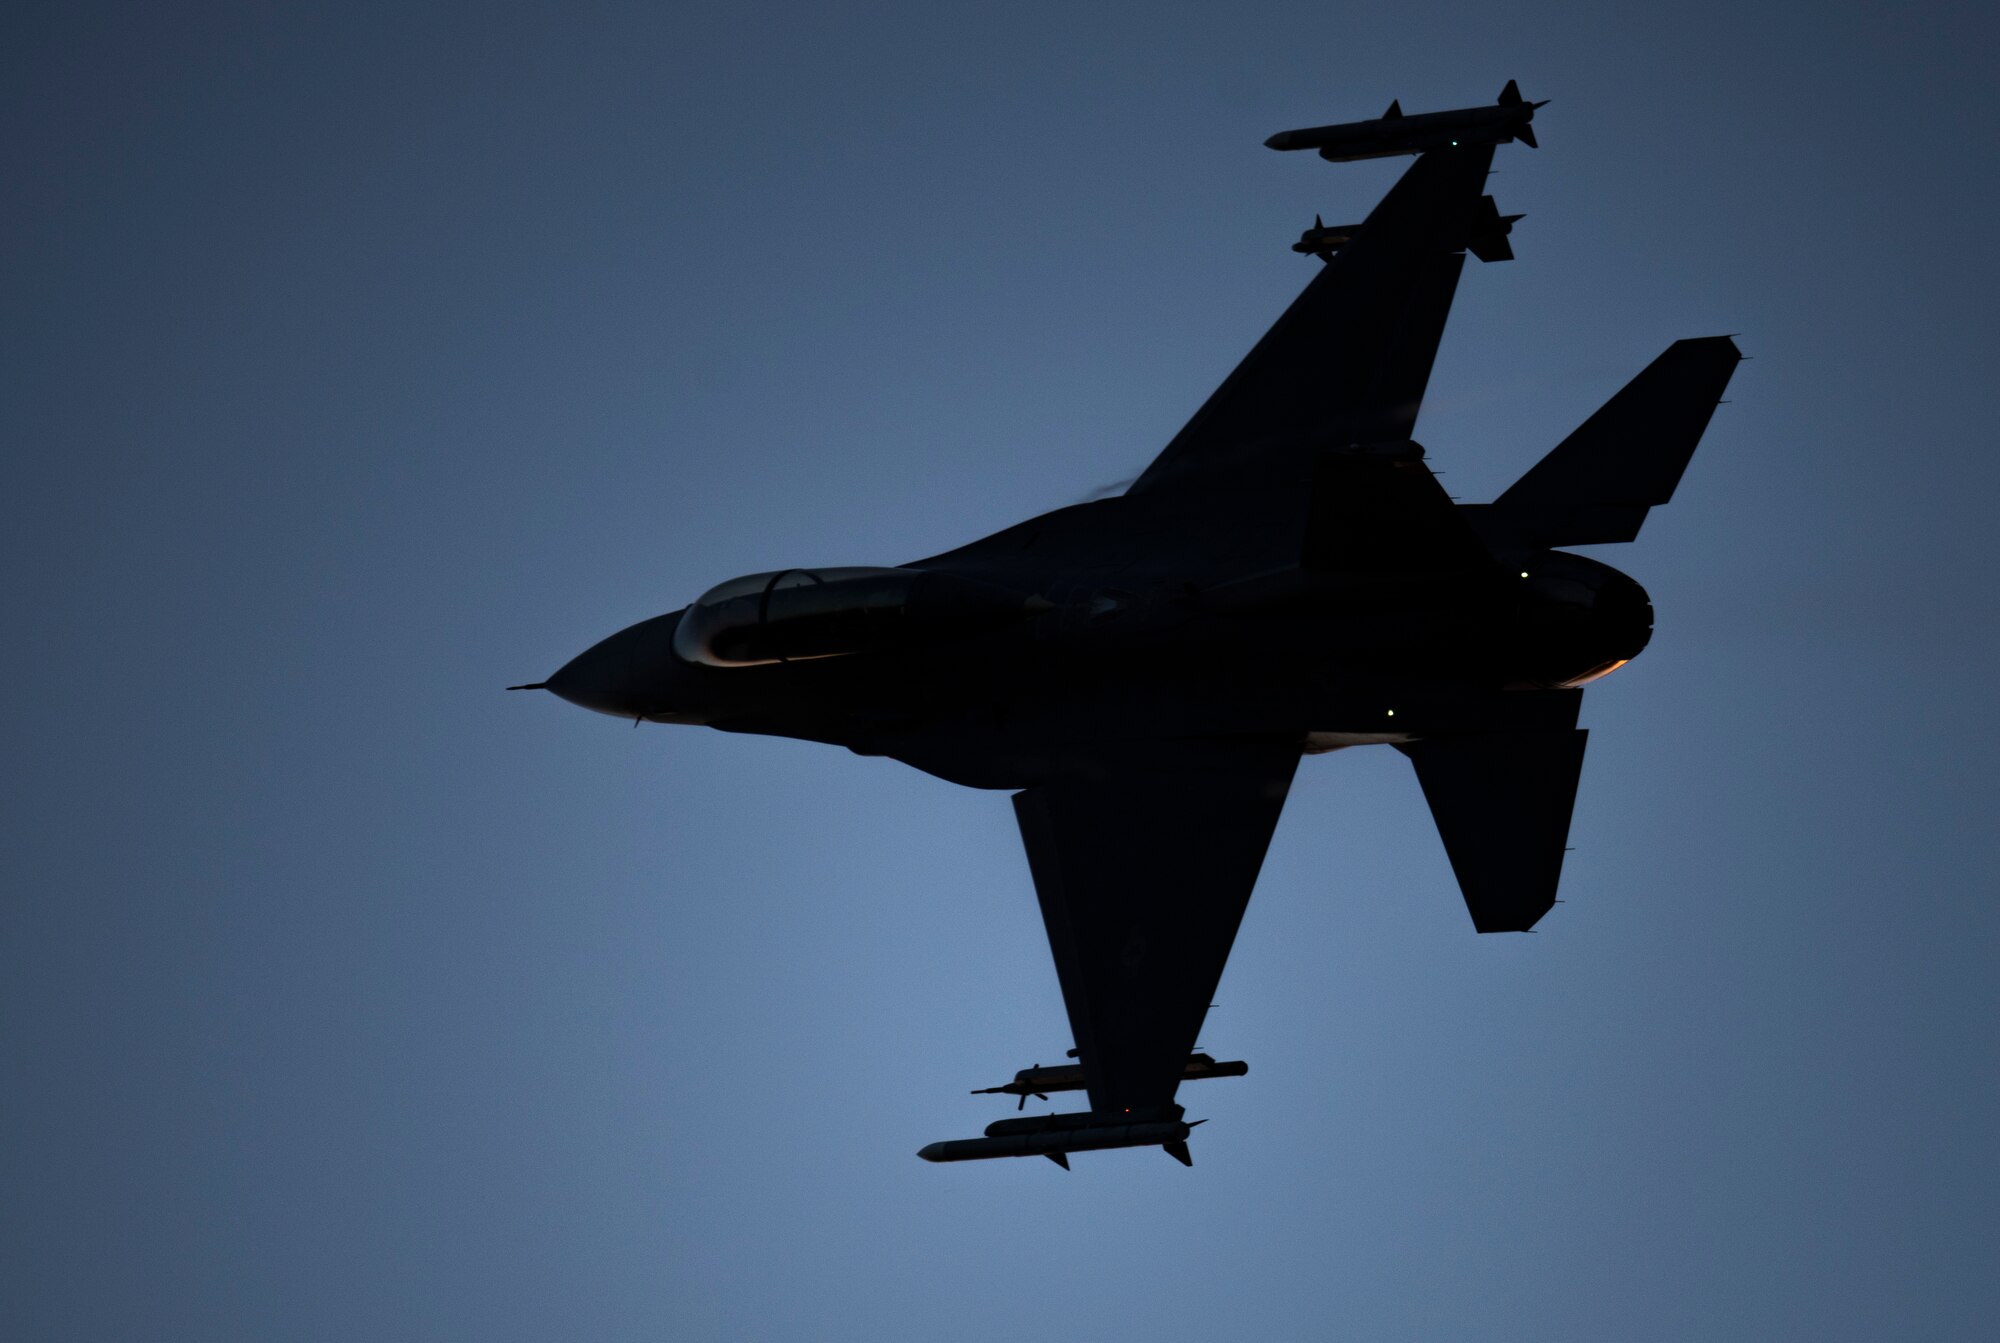 An F-16 Fighting Falcon, assigned to the 510th Fighter Squadron, Aviano Air Base, Italy, flies over Royal Air Force Lakenheath, England, Sept. 9, 2020. The 510th FS is conducting close air support training with the 321st Special Tactics Squadron, the 19th Regiment Royal Artillery and the 2nd Air Support Operations Squadron to improve combat capabilities and interoperability between allied nations. (U.S. Air Force photo by Airman 1st Class Jessi Monte)